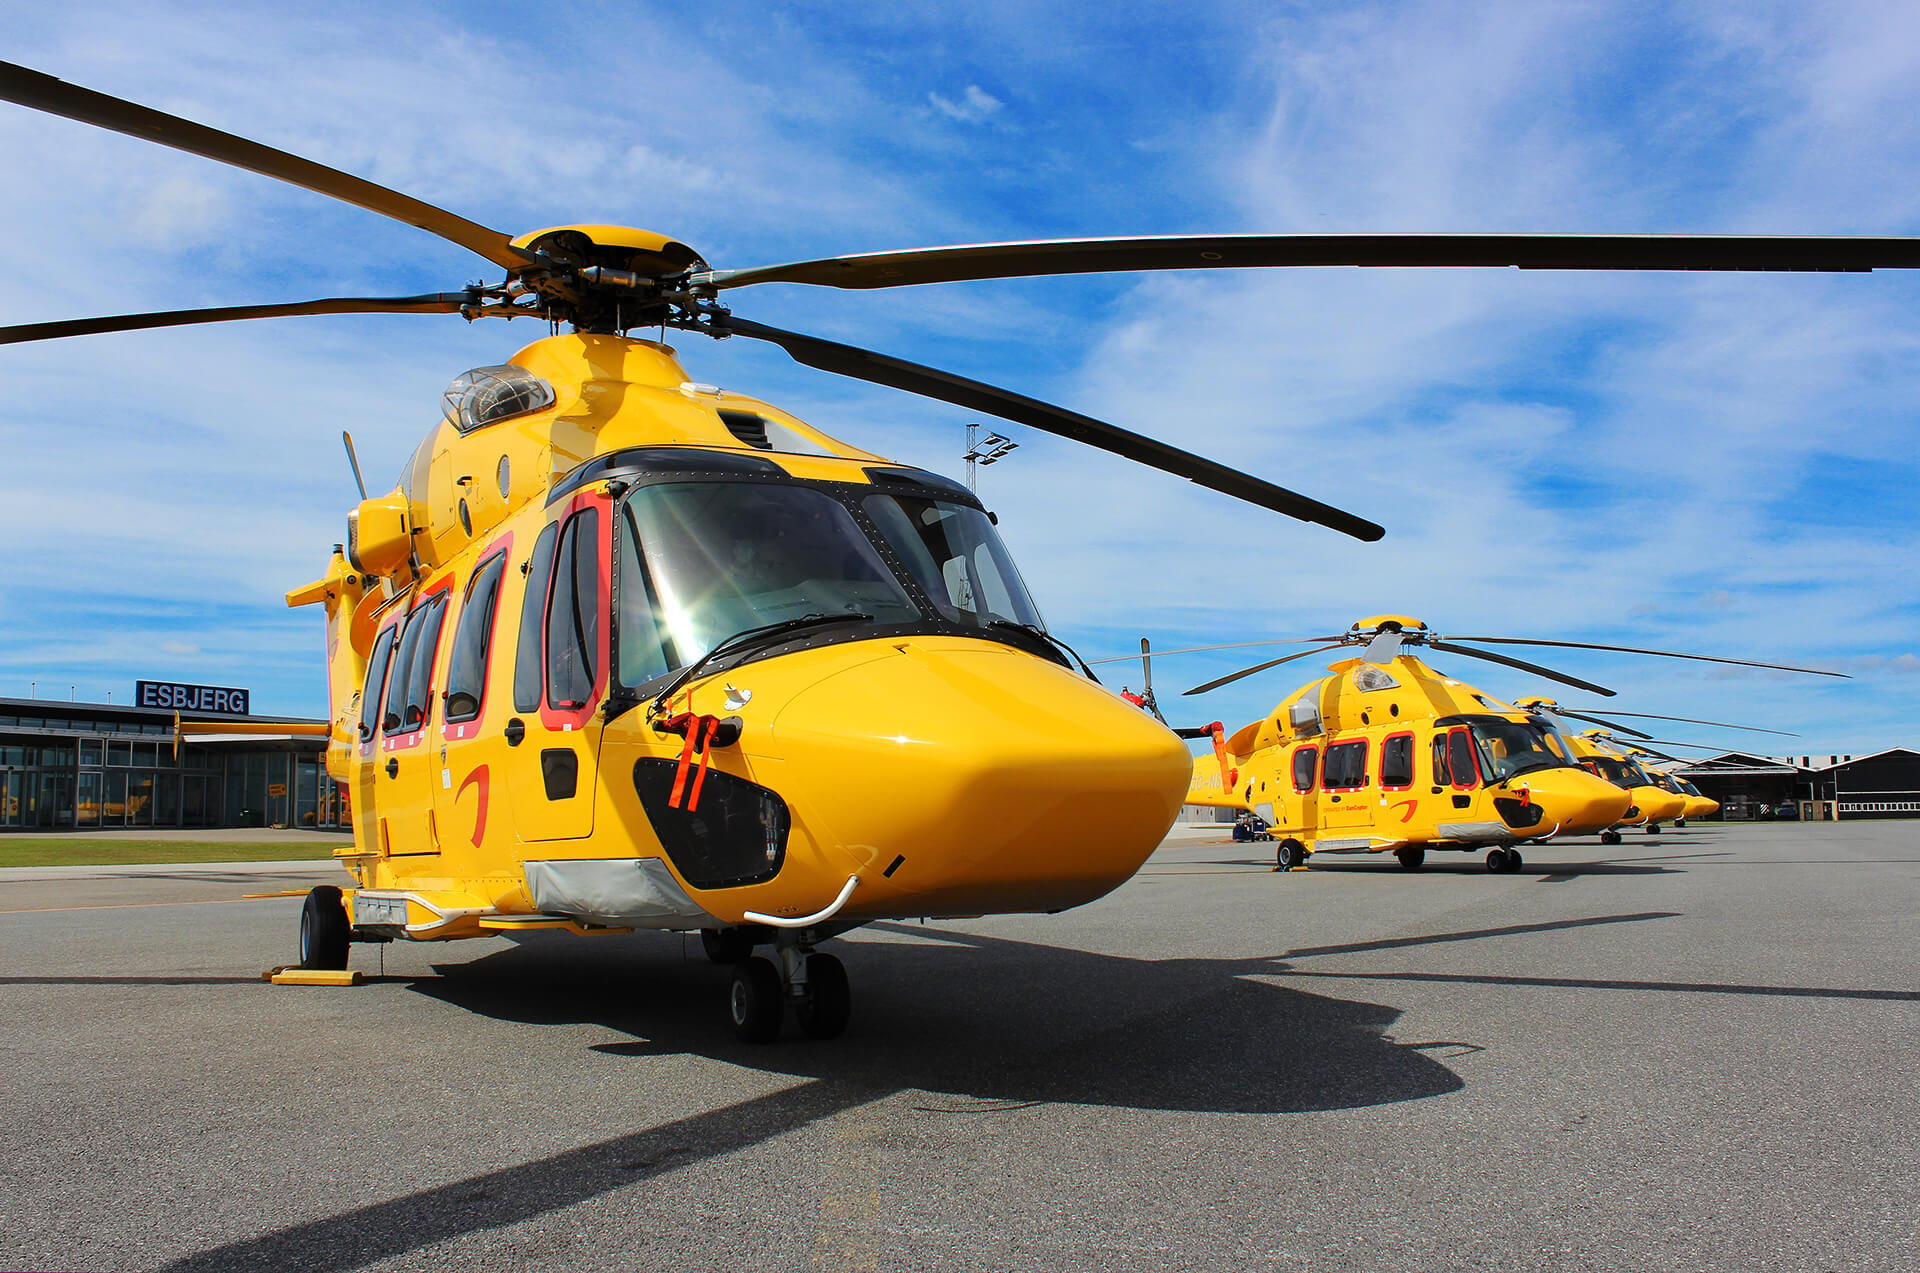 H175 helicopters rest on tarmac